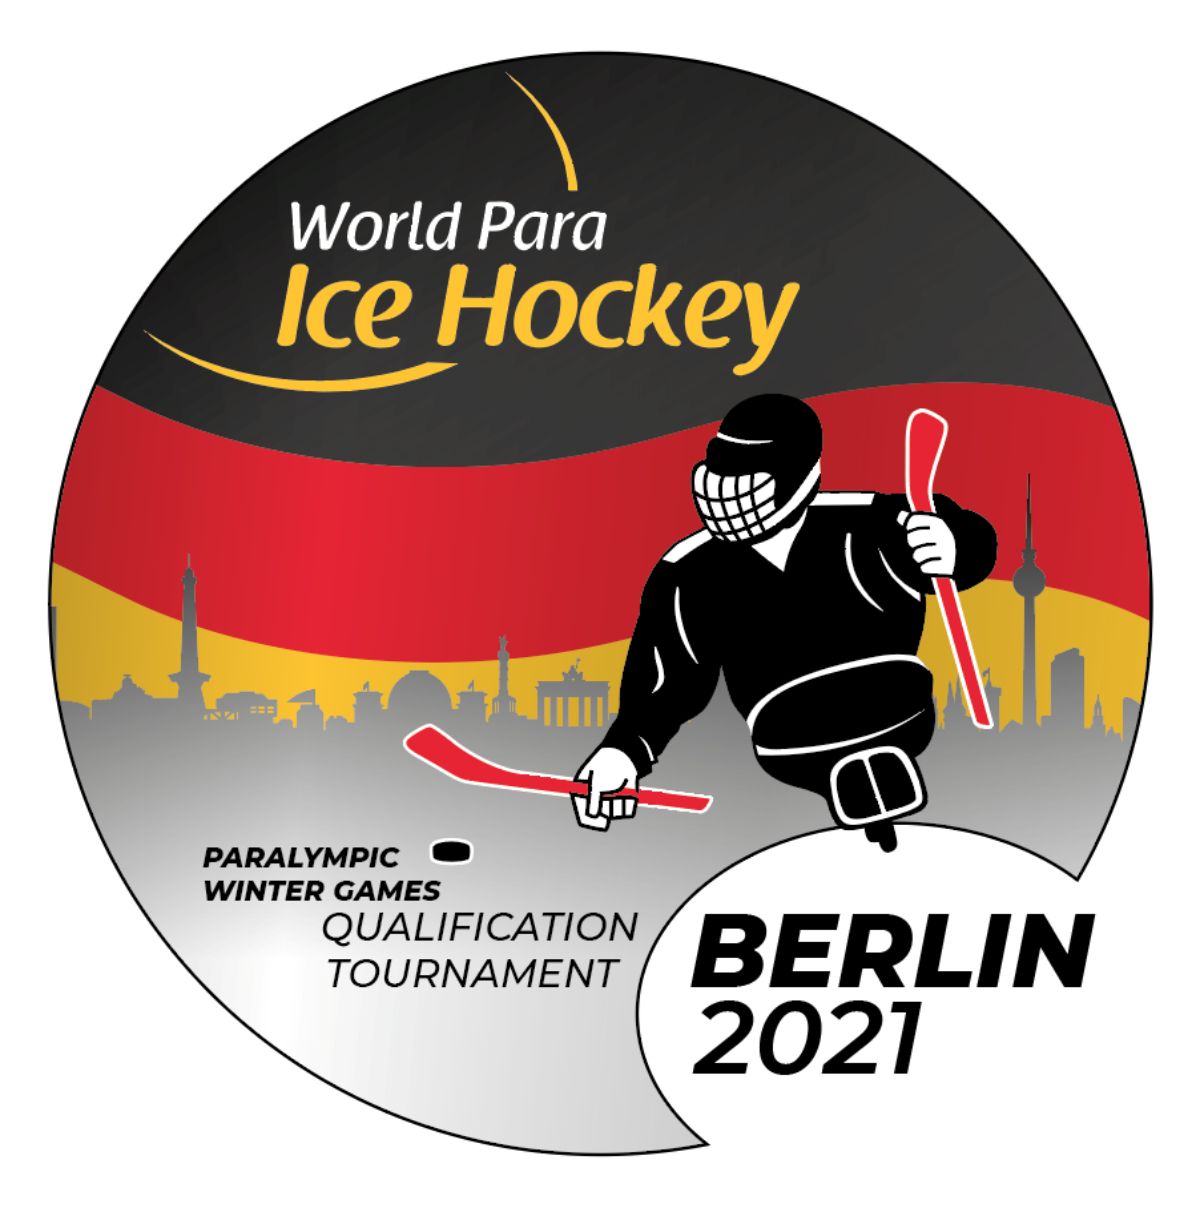 Berlin Paralympic Winter Games Qualification Tournament 2021